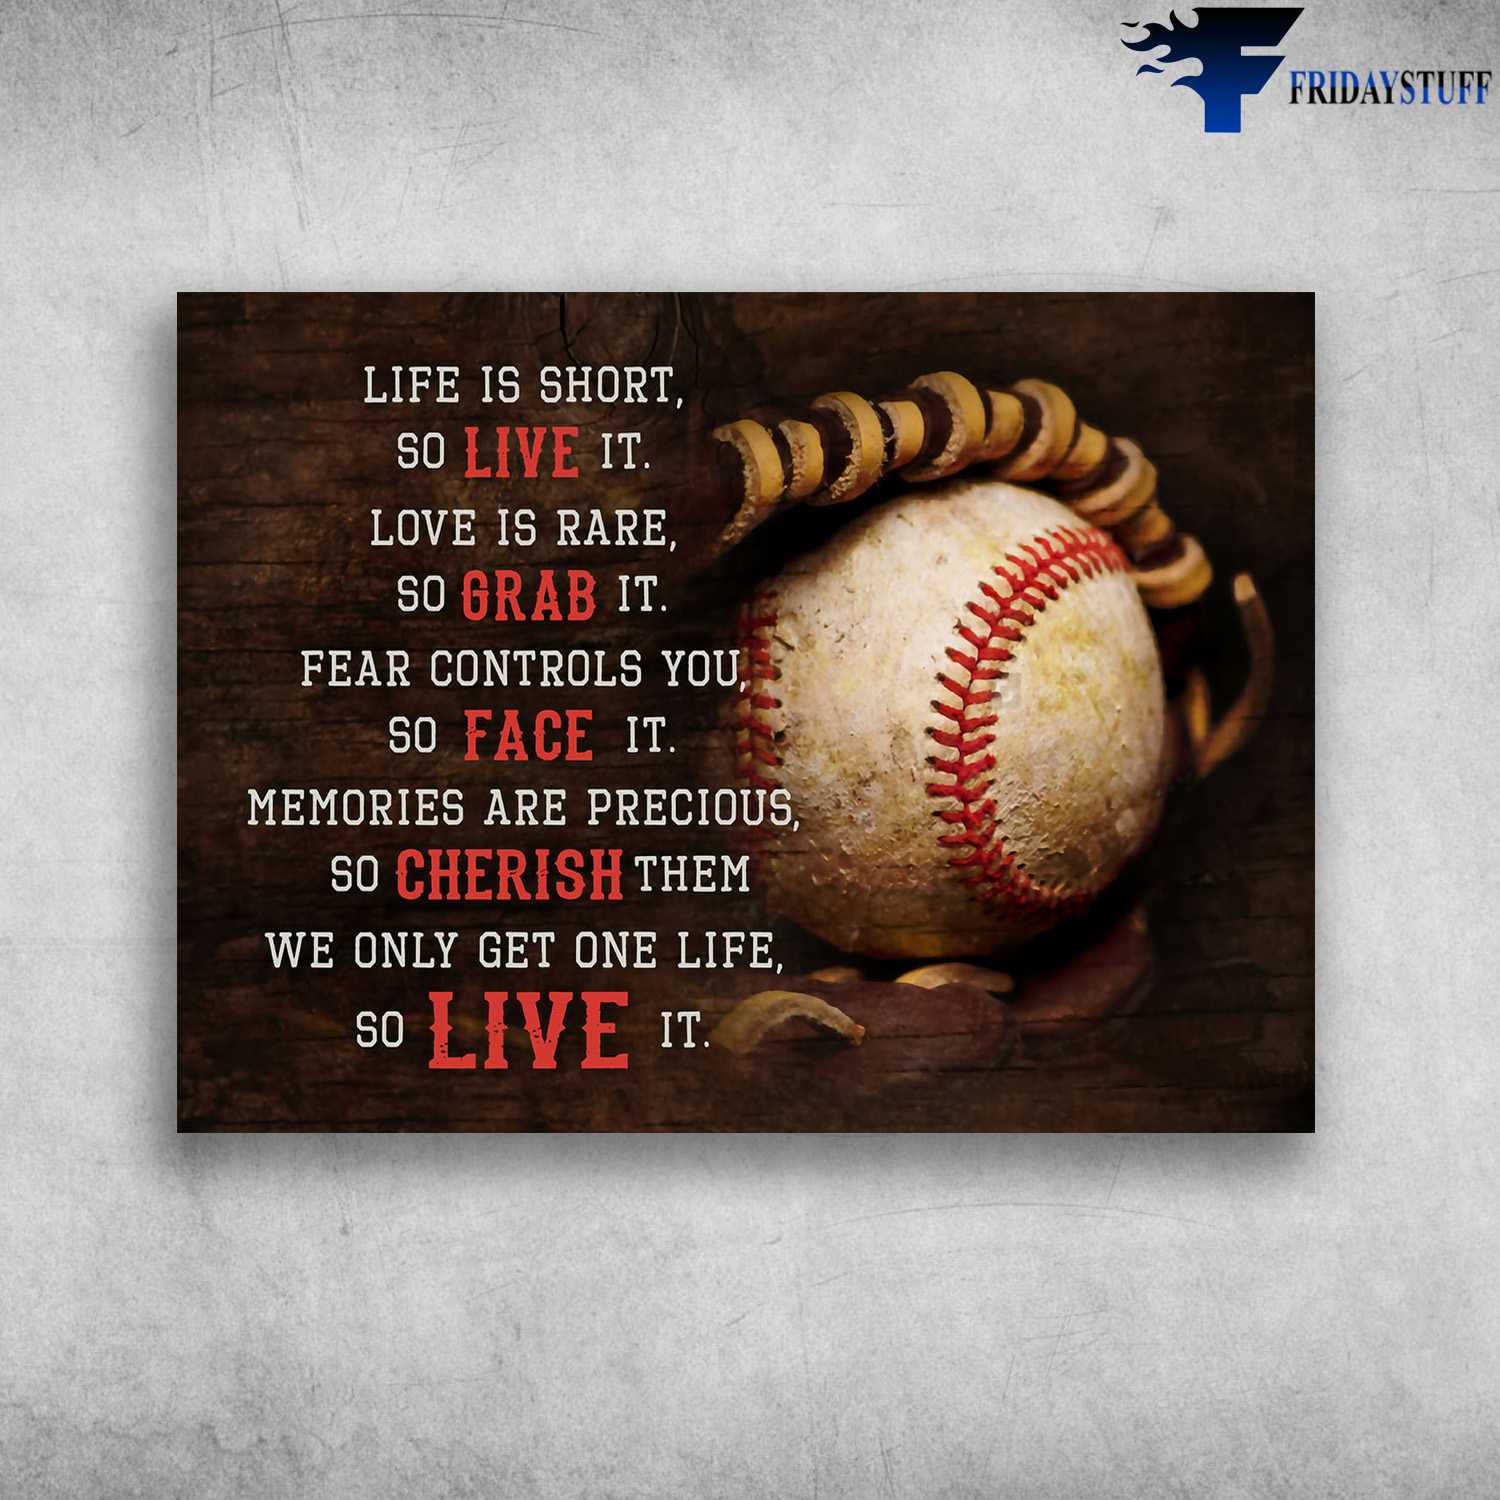 Baseball Lover - Life Is Short, So Live It, Love Is Rare, So Grab It, Fear Sontrols You, So Face It, Memories Are Precious, So Cherish Them, We Only Get One Life, So Life It